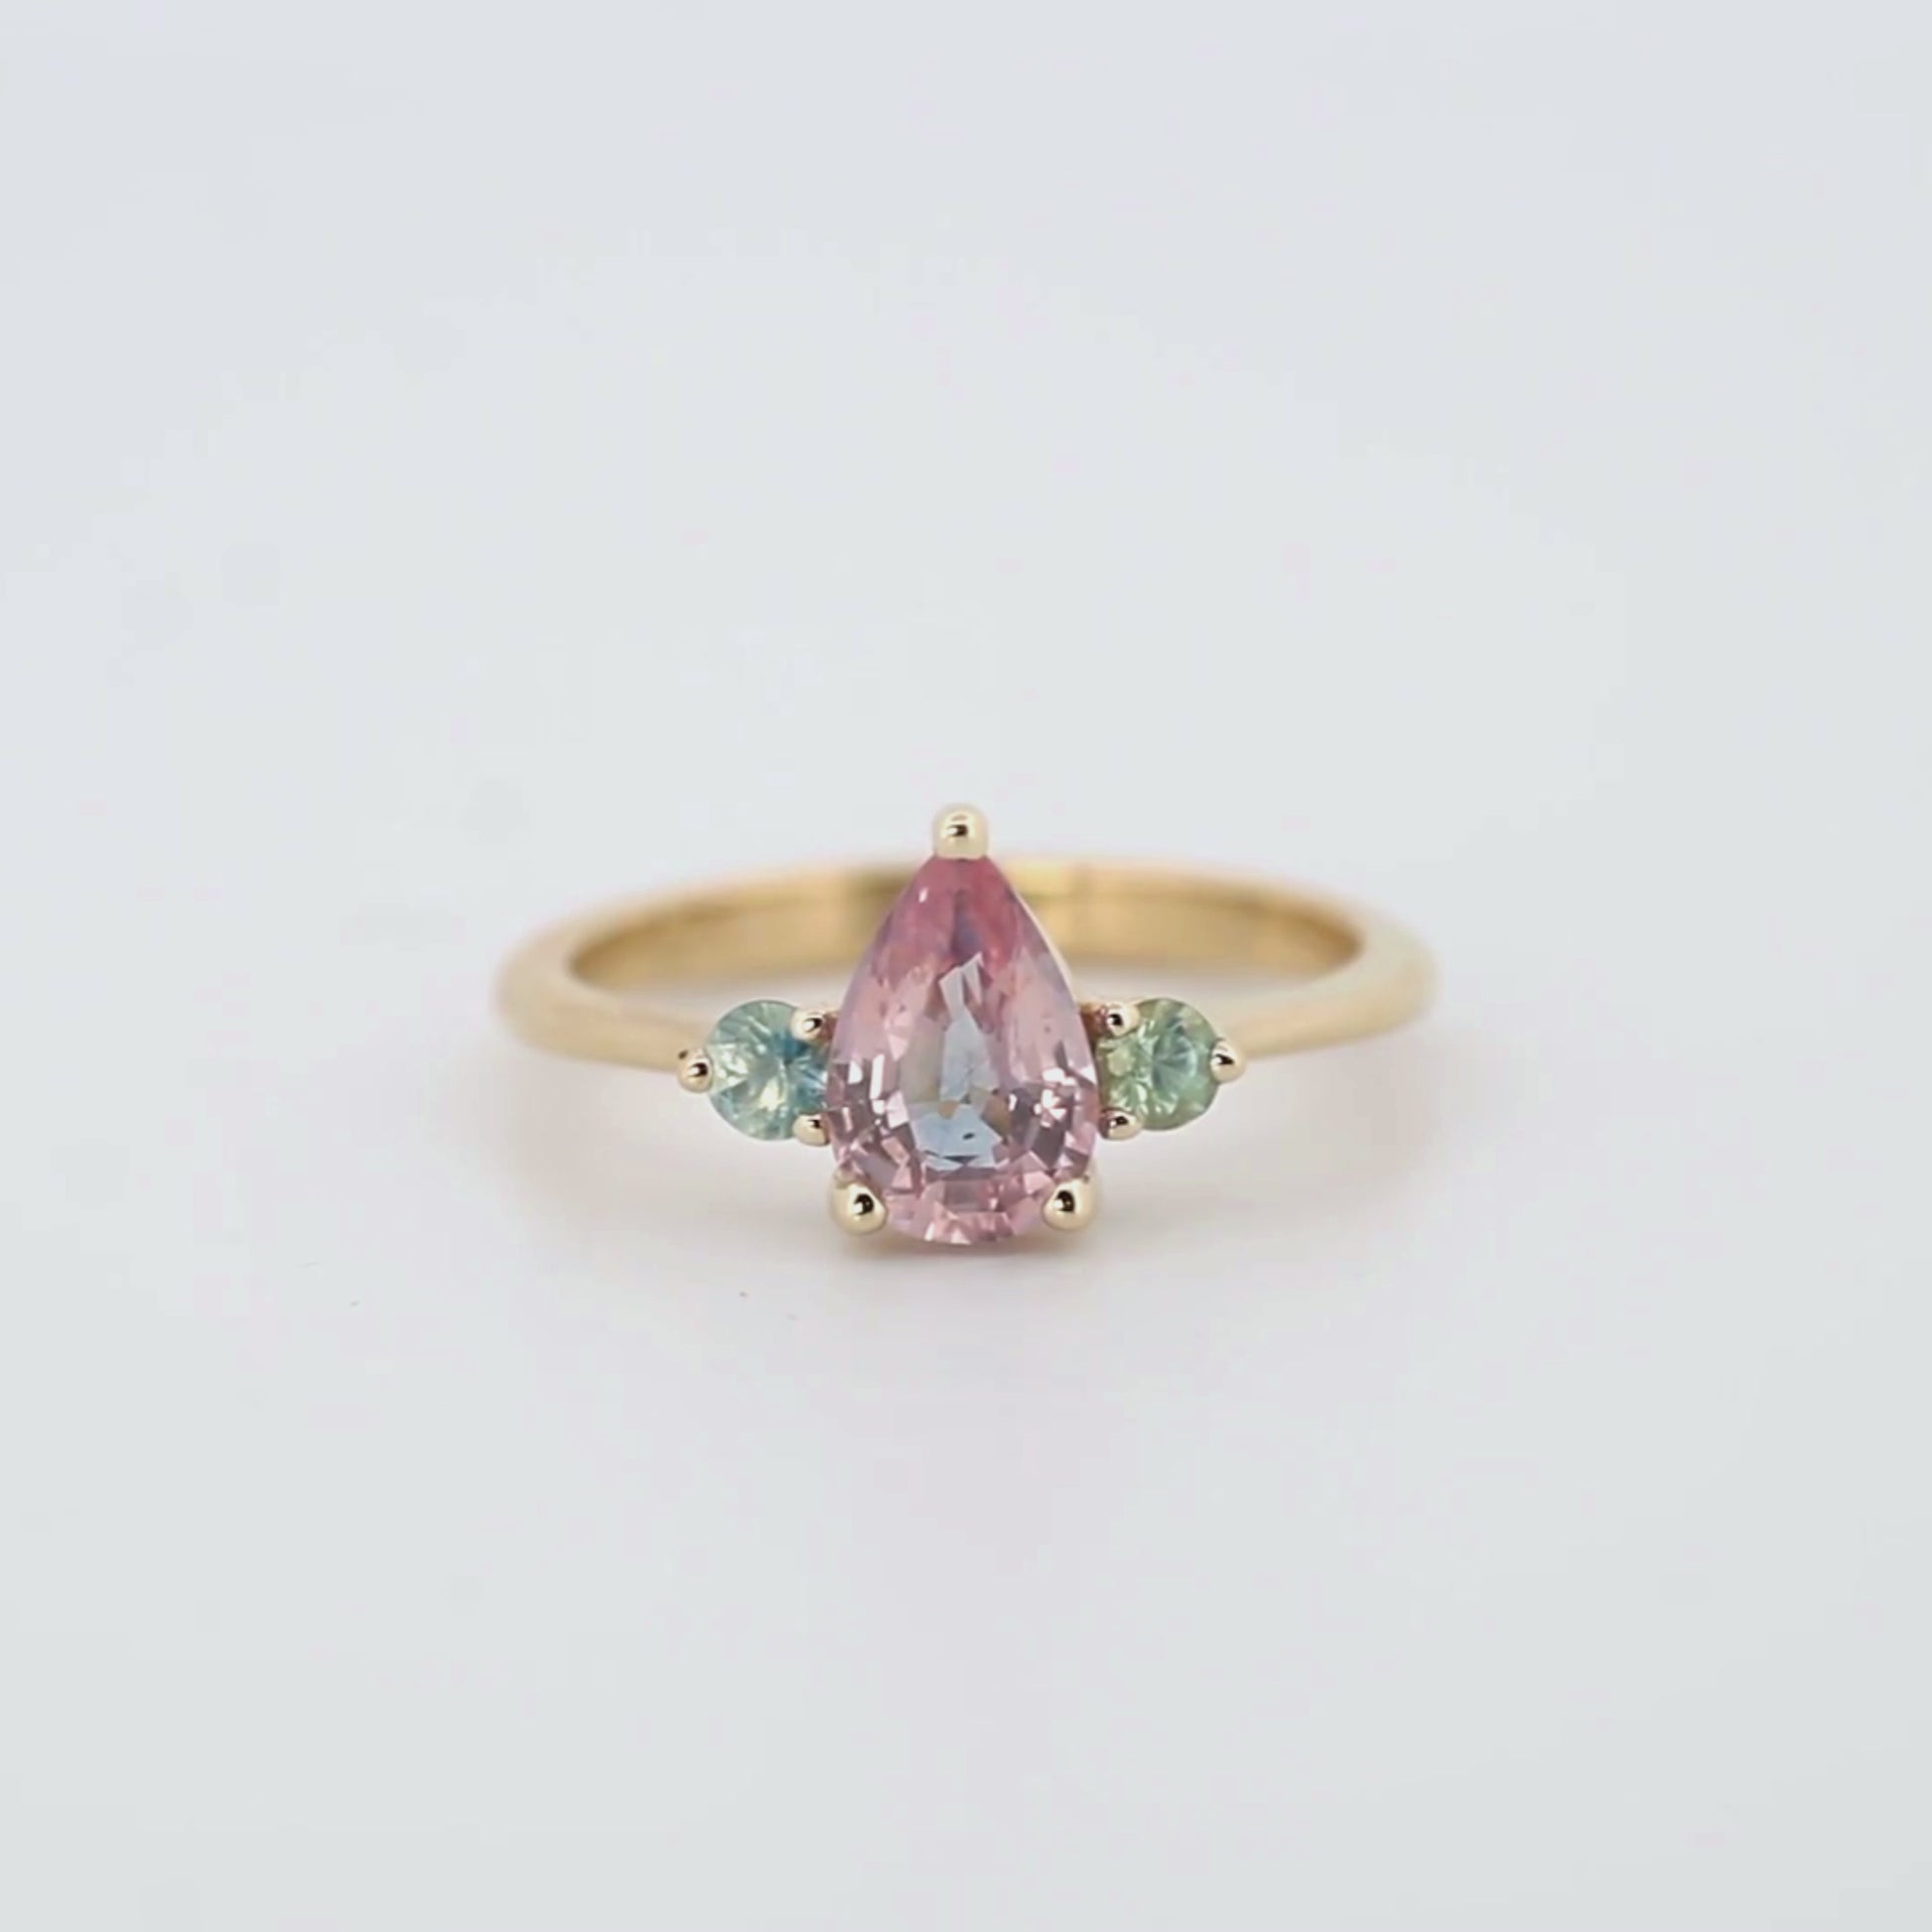 Drea Ring with a 1.40 Carat Clear Pink Pear Sapphire and Sapphire Accents in 14k Yellow Gold - Ready to Size and Ship